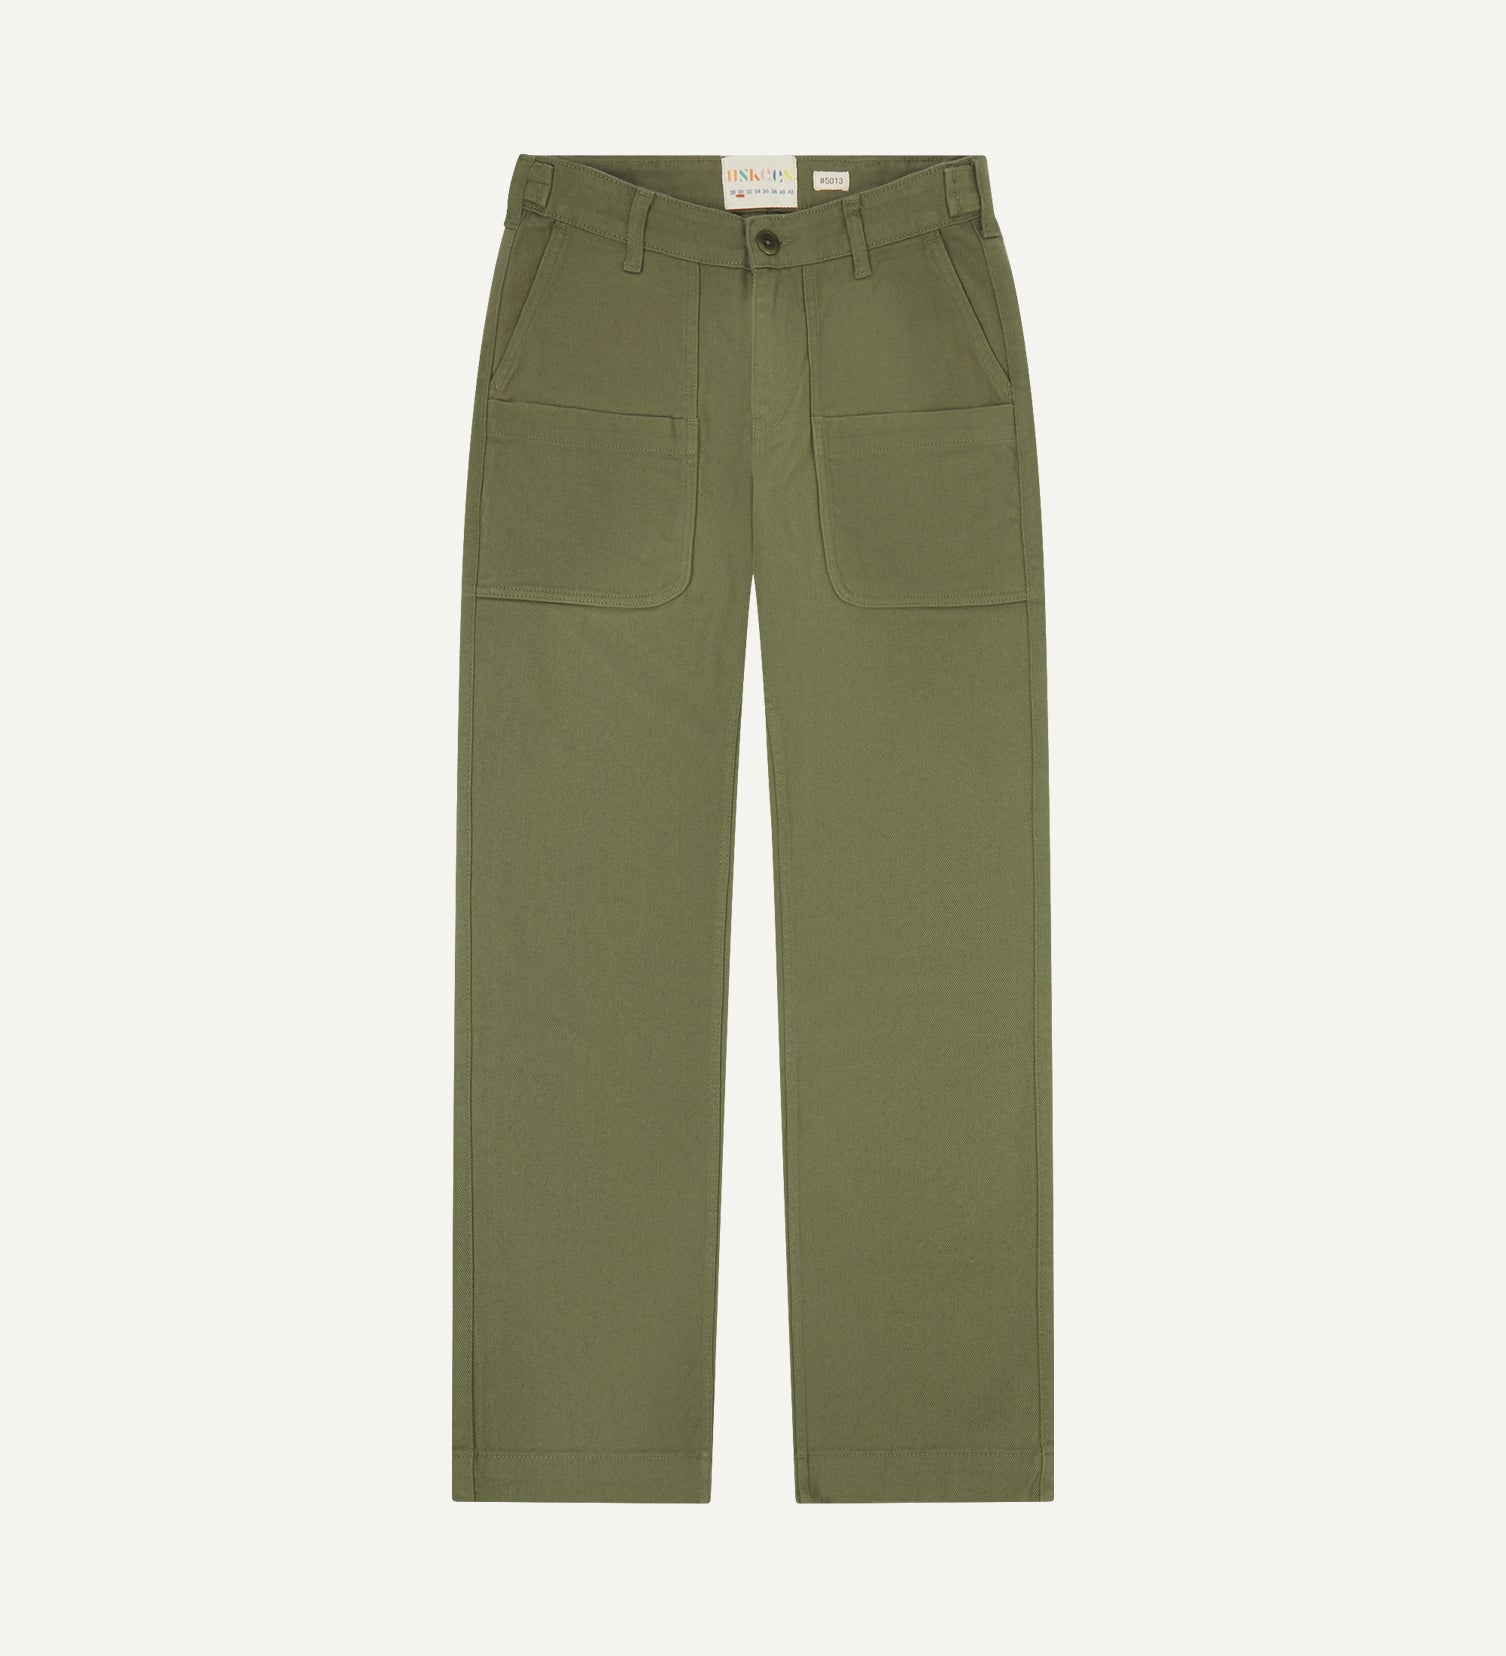 Flat shot of uskees moss drill trousers for men showing label at waistband